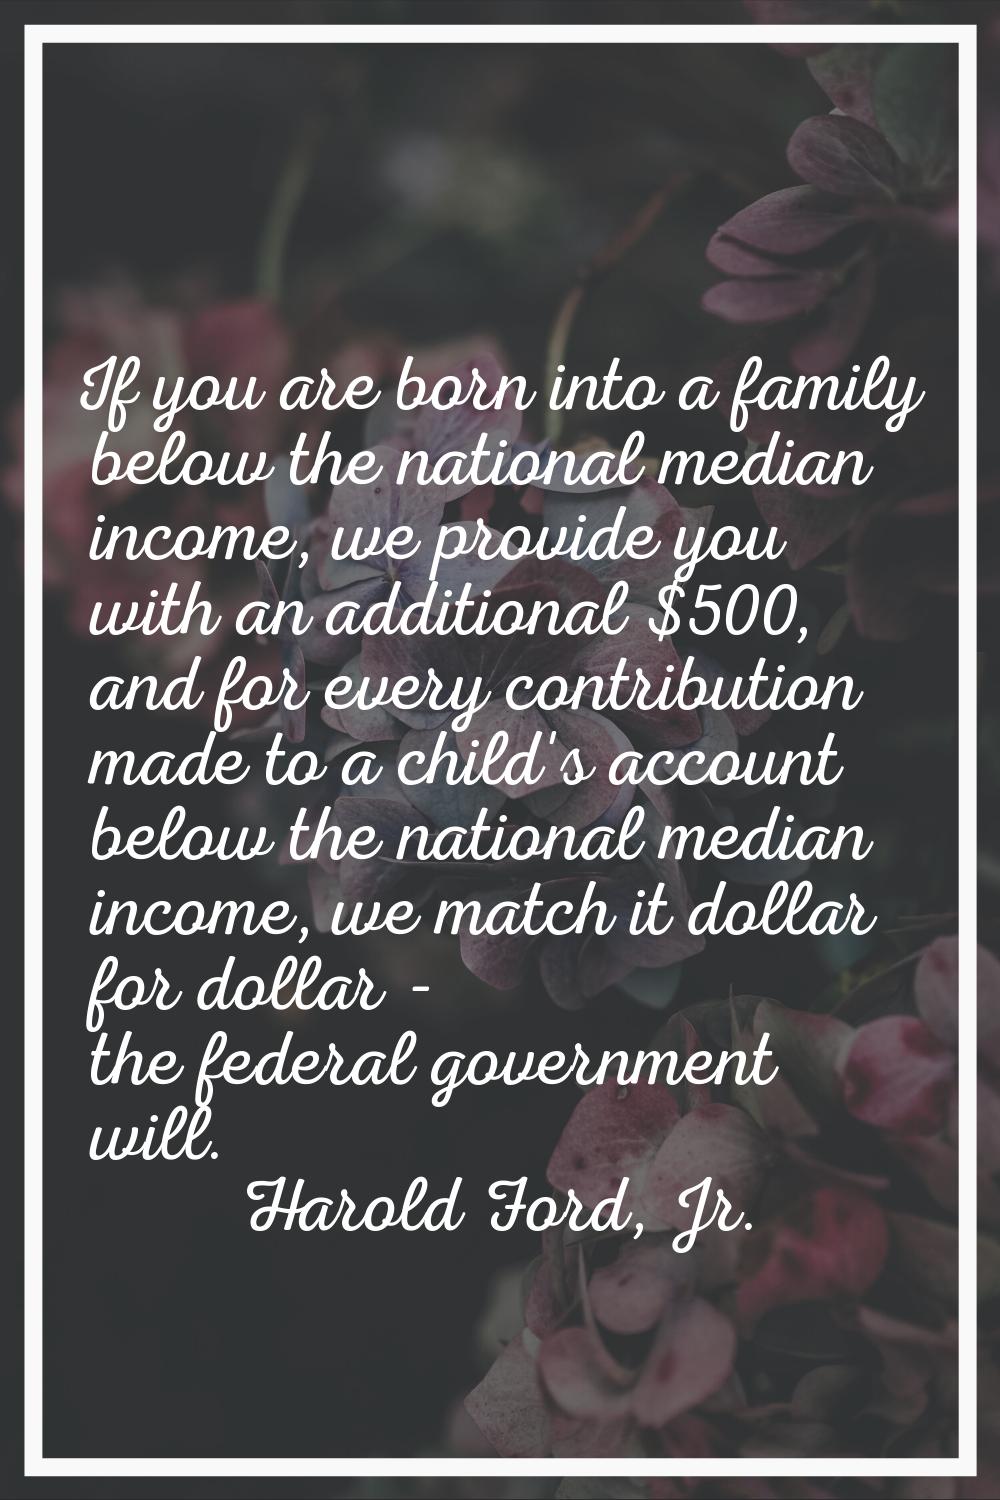 If you are born into a family below the national median income, we provide you with an additional $